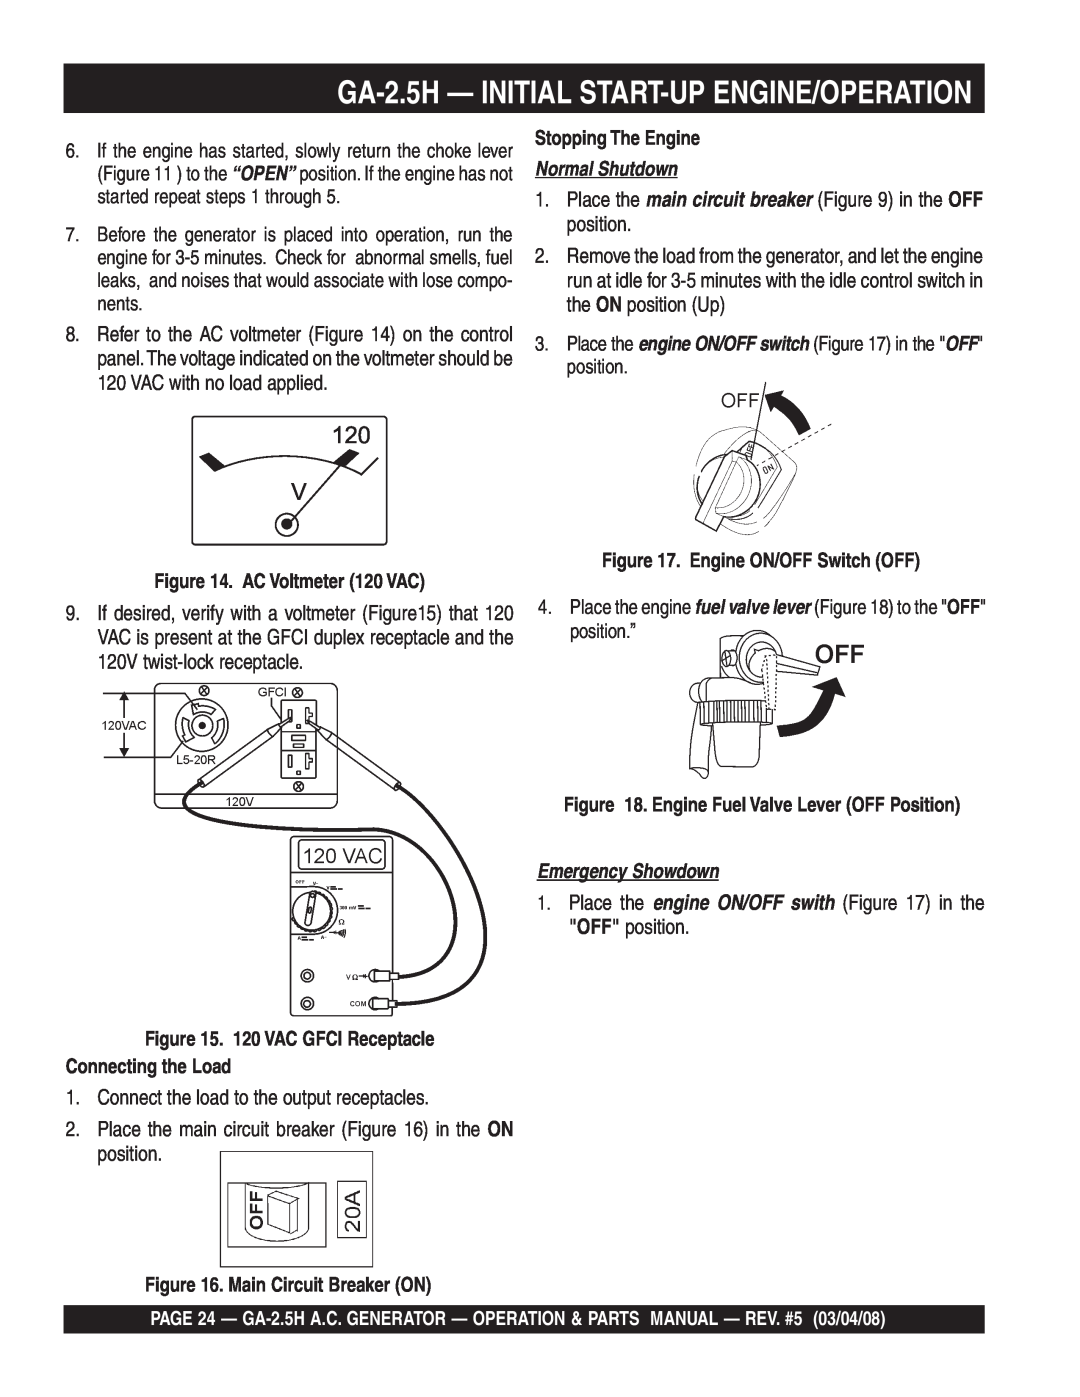 Multiquip manual GA-2.5H - INITIAL START-UP ENGINE/OPERATION, AC Voltmeter 120 VAC, Stopping The Engine, Normal Shutdown 